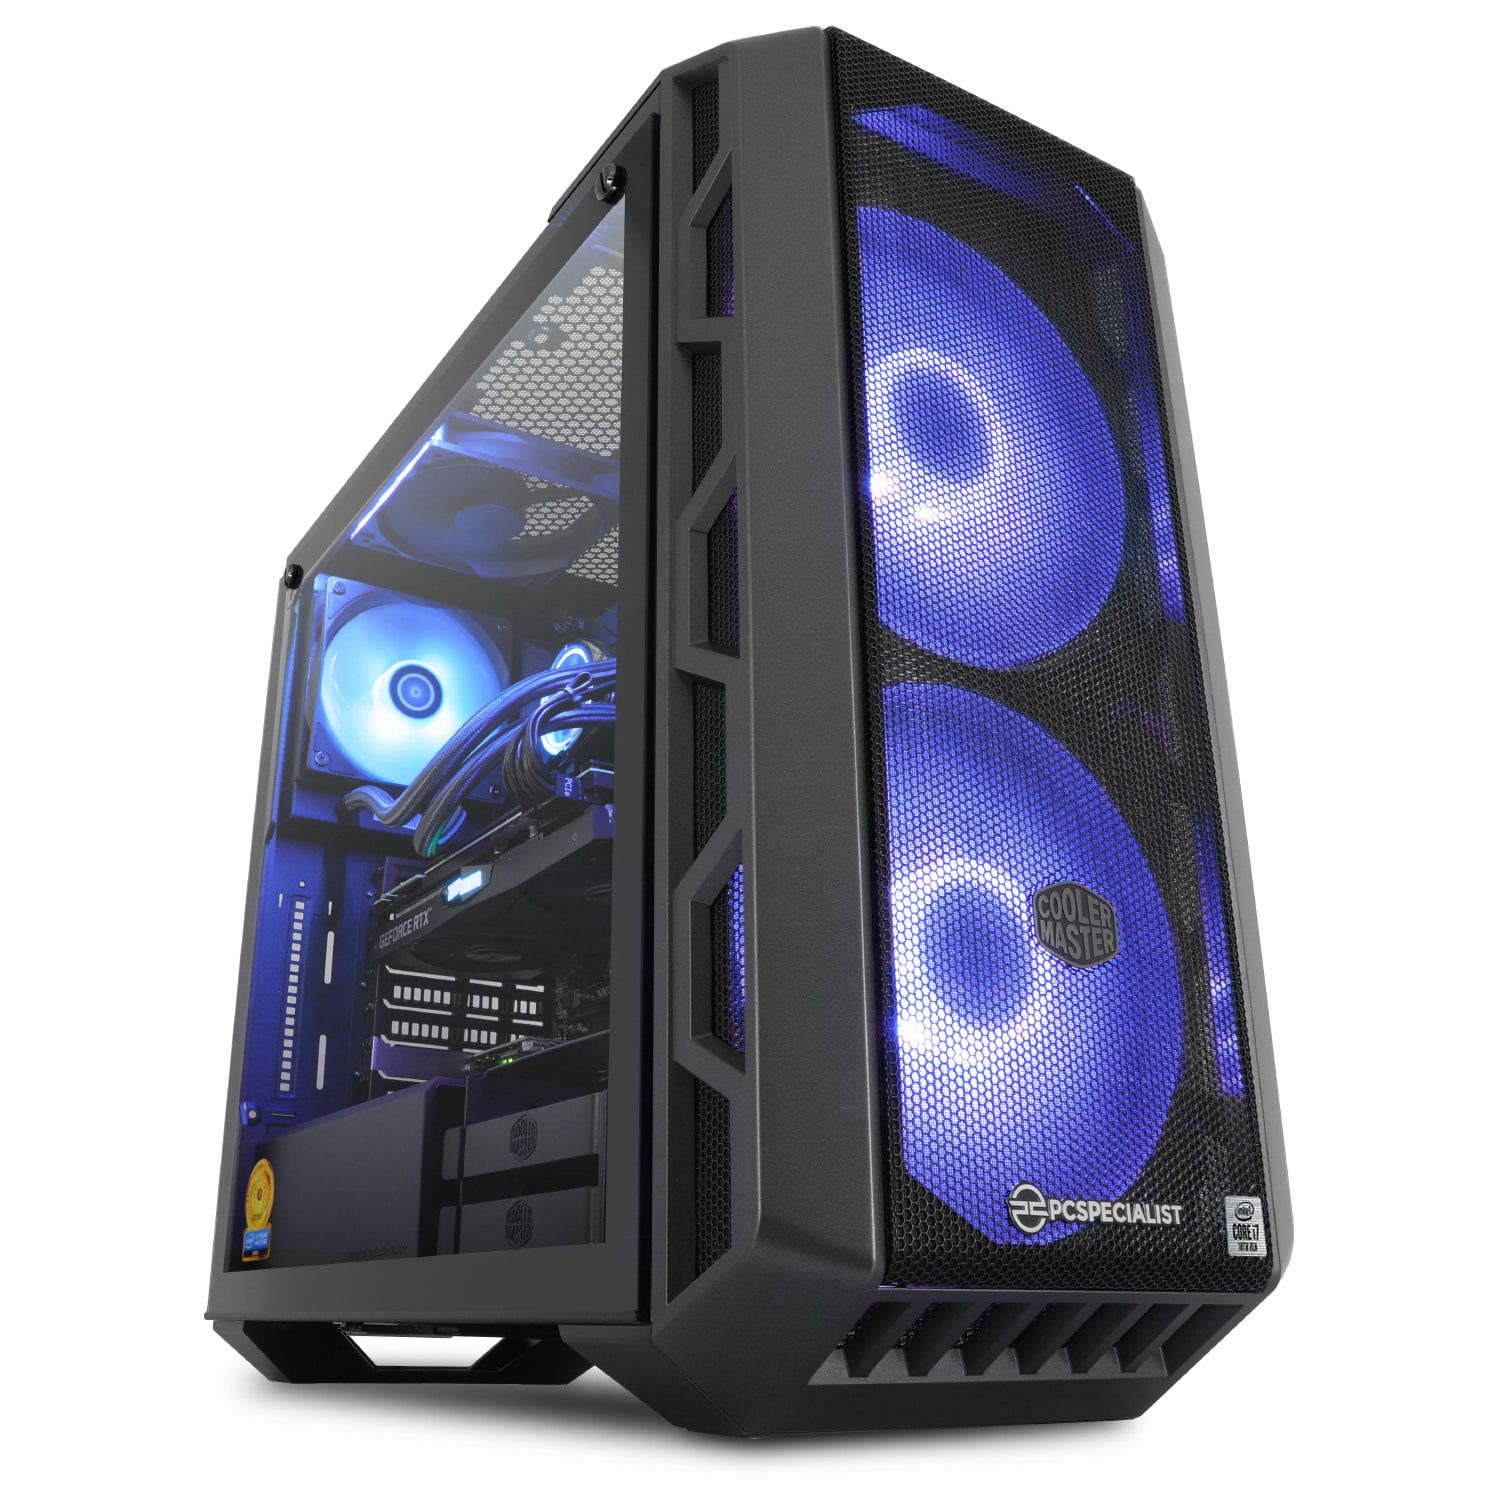 PCSpecialist Intel Extreme Masters gaming-PC |